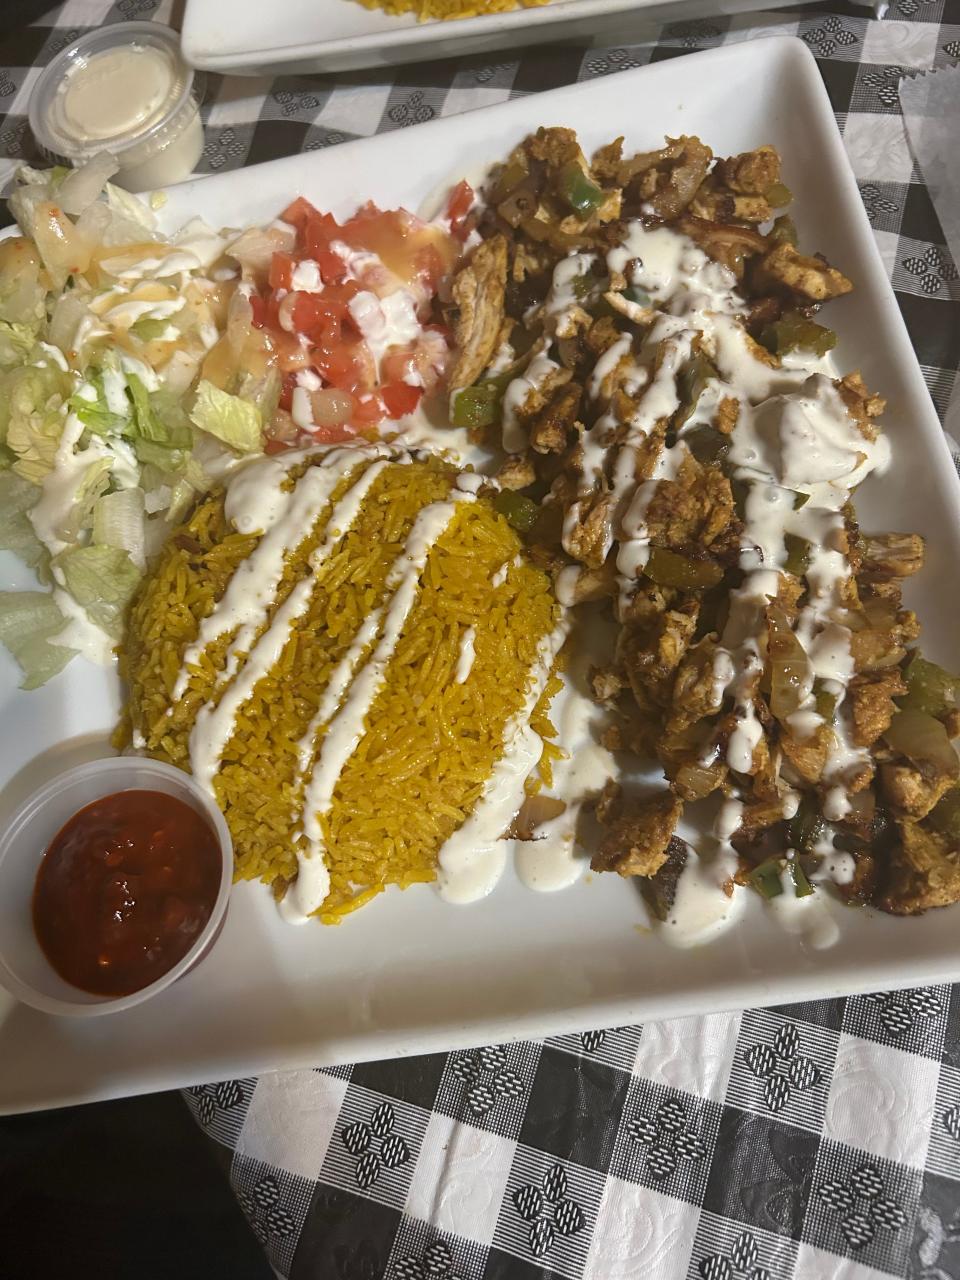 Halal chicken over rice is the top seller at Mid-East Cafe and Restaurant in Akron.